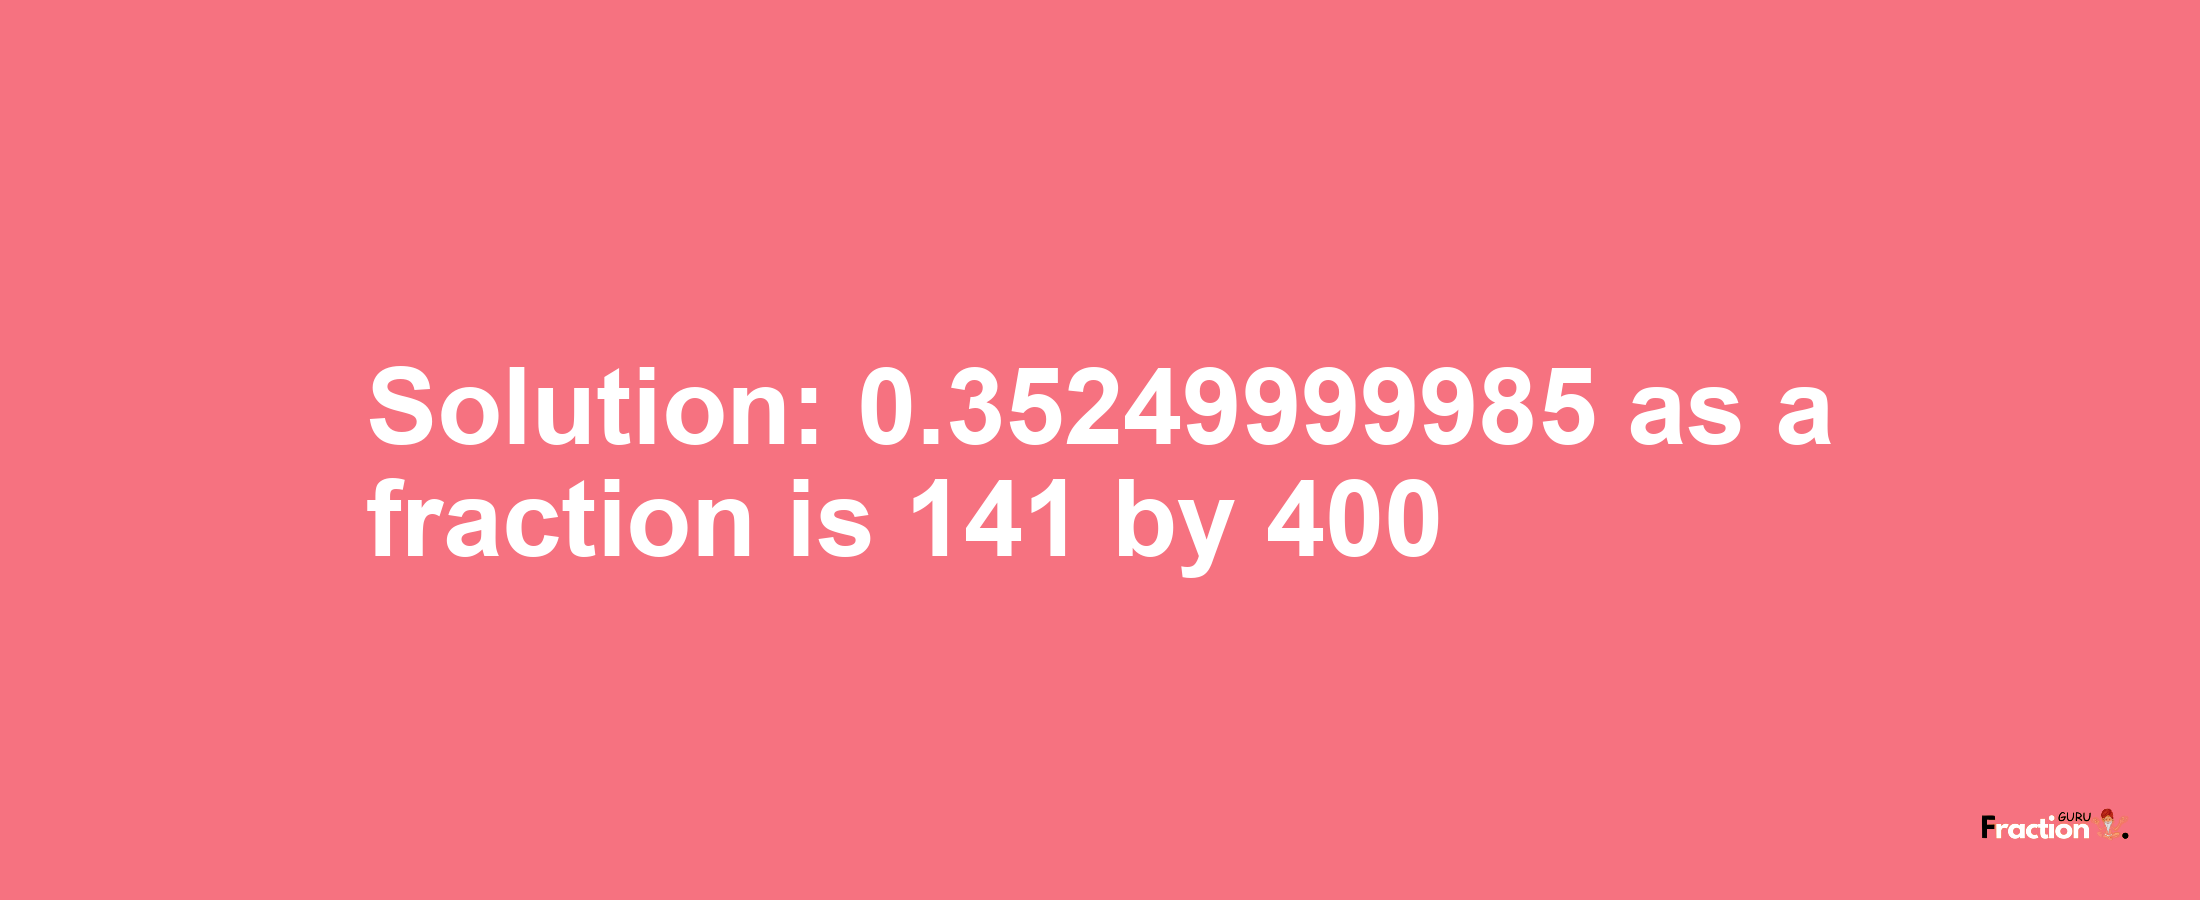 Solution:0.35249999985 as a fraction is 141/400